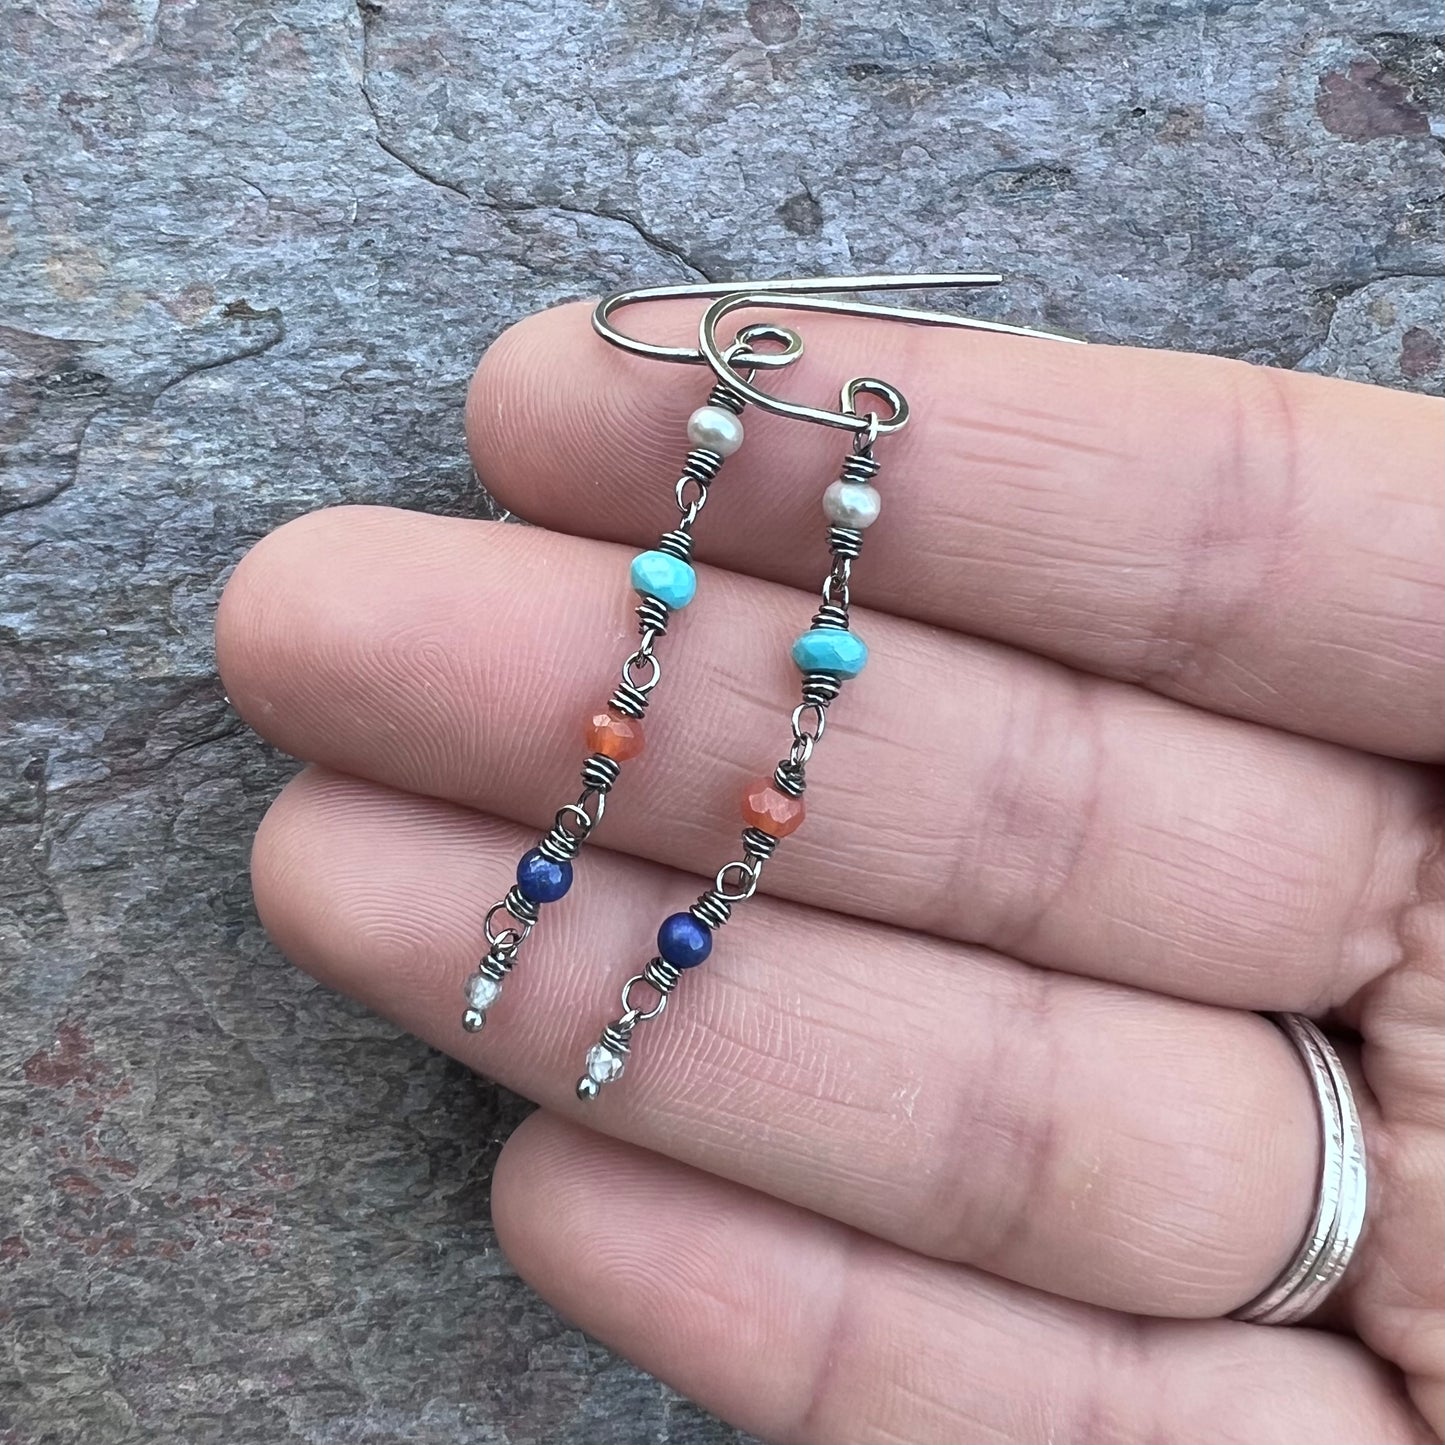 Pearl, Turquoise, Carnelian, Lapiz, and Zircon Sterling Silver and Black Pearl Earrings